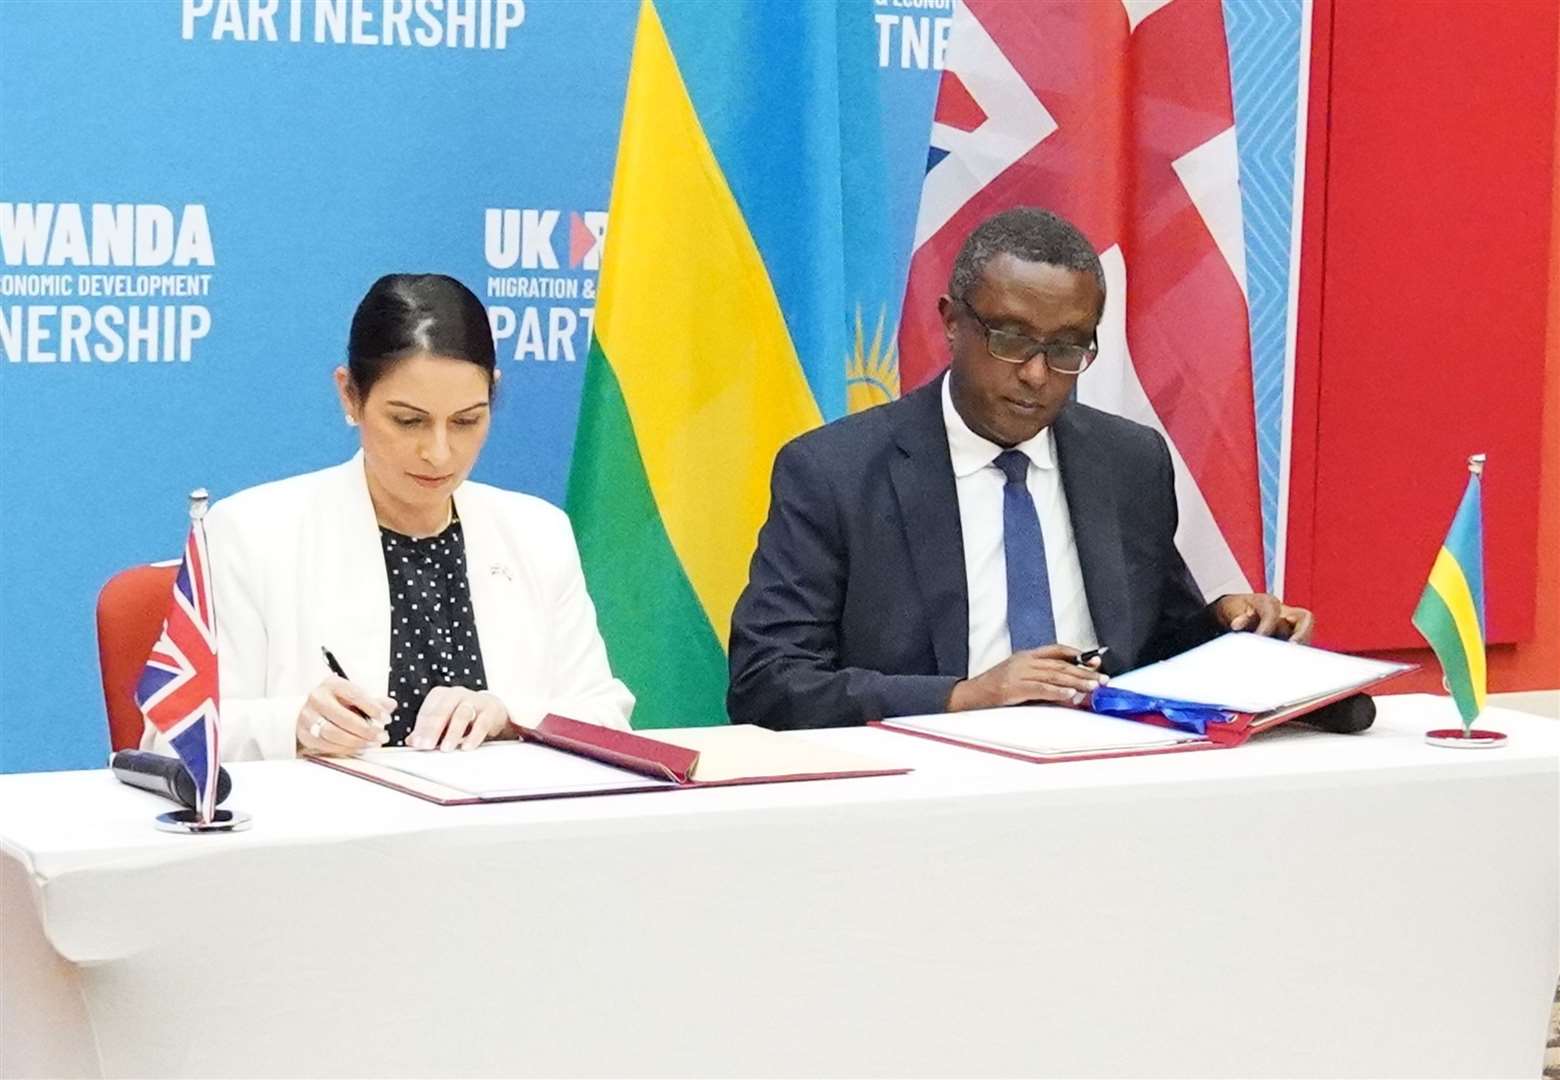 Home Secretary Priti Patel and the Rwandan minister for foreign affairs and international co-operation, Vincent Biruta, signed a ‘world-first’ migration and economic development partnership in the East African nation’s capital Kigali (Flora Thompson/PA)